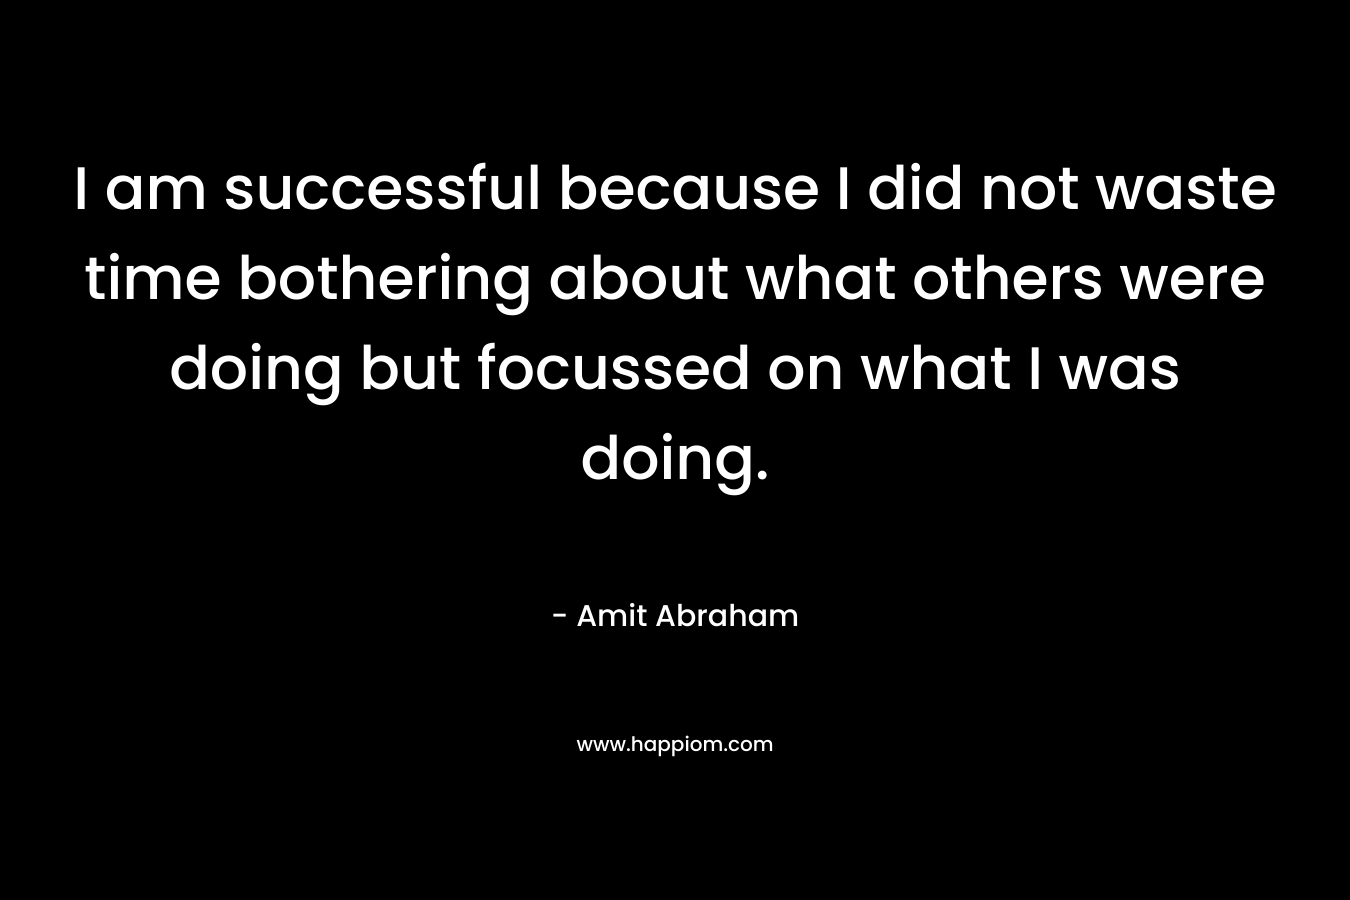 I am successful because I did not waste time bothering about what others were doing but focussed on what I was doing.